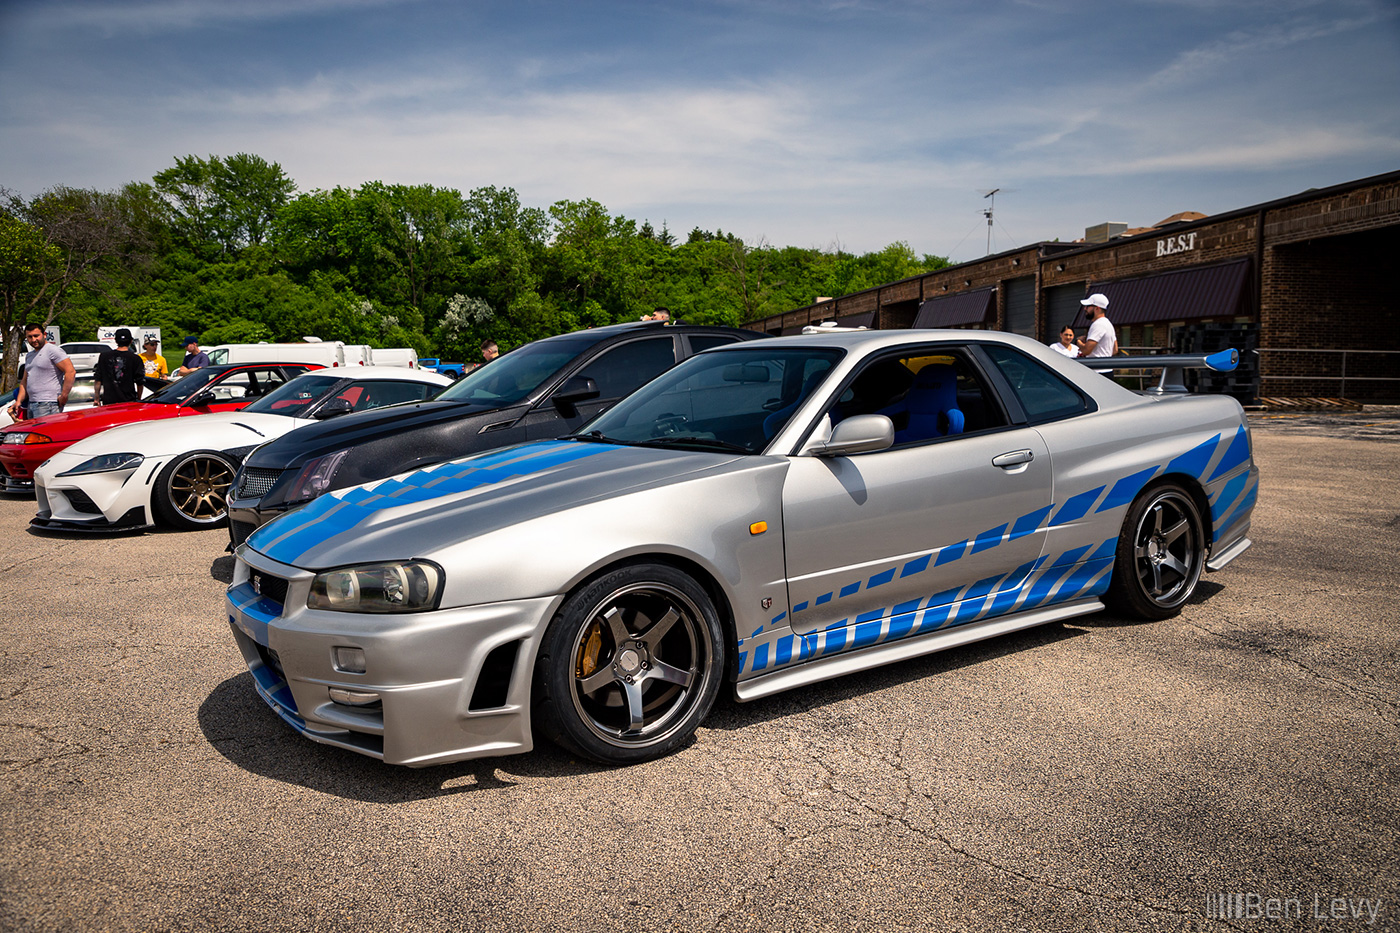 Silver R Nissan Skyline Gt R With Blue Graphics Benlevy Com